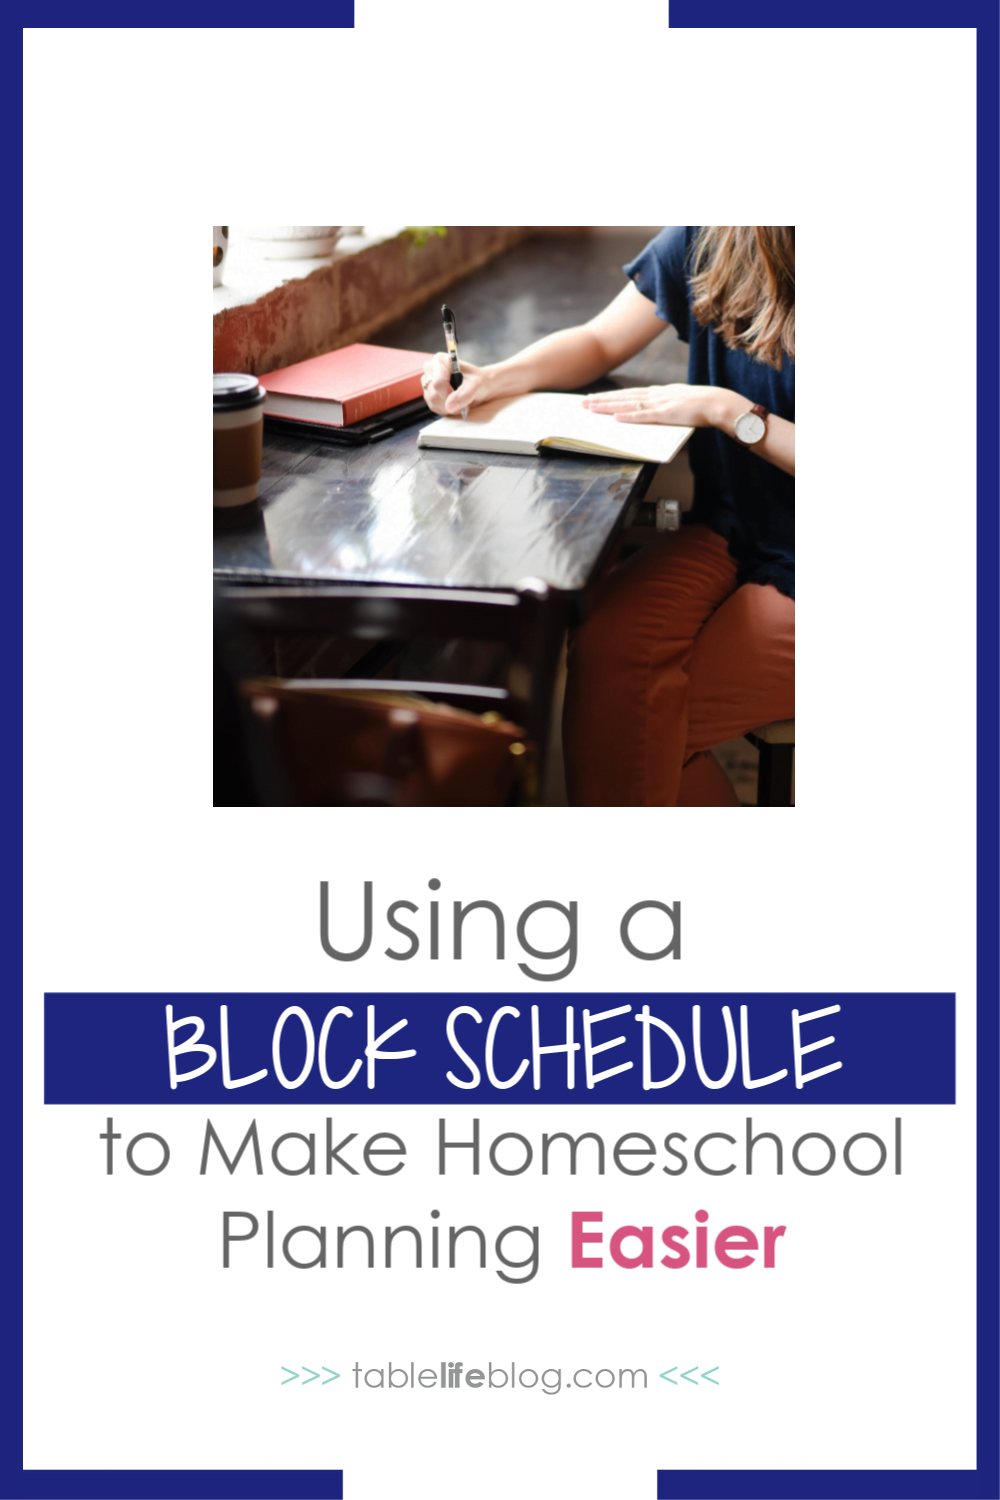 Wondering if a homeschool block schedule could meet your planning needs? Amanda shares how she plans her homeschool lessons and how block scheduling keeps her on track, but gives her freedom to embrace child-led learning.